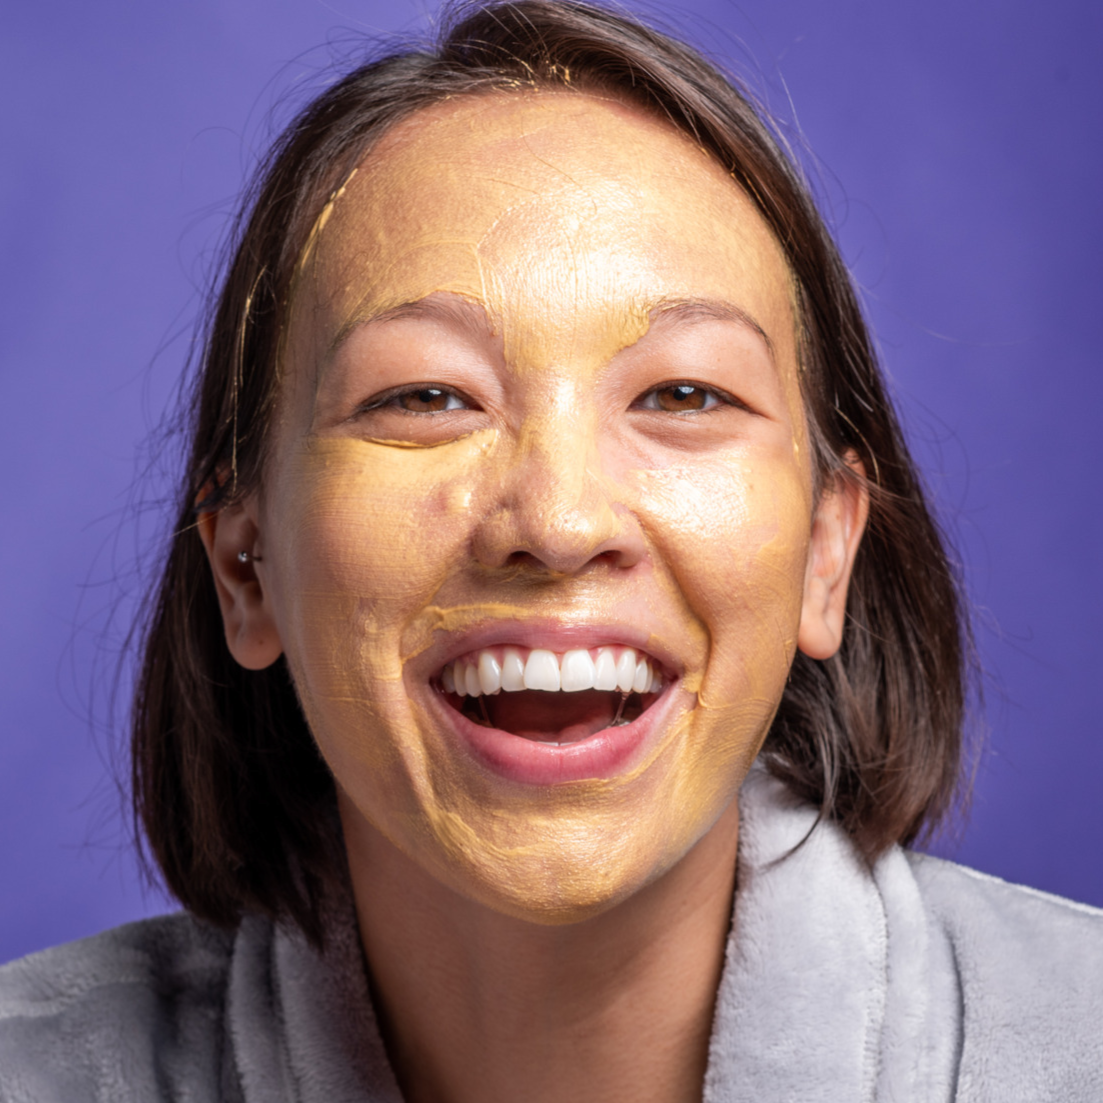 SHOW YOUR GLOW - Colloidal Gold & Honey Beauty Mask